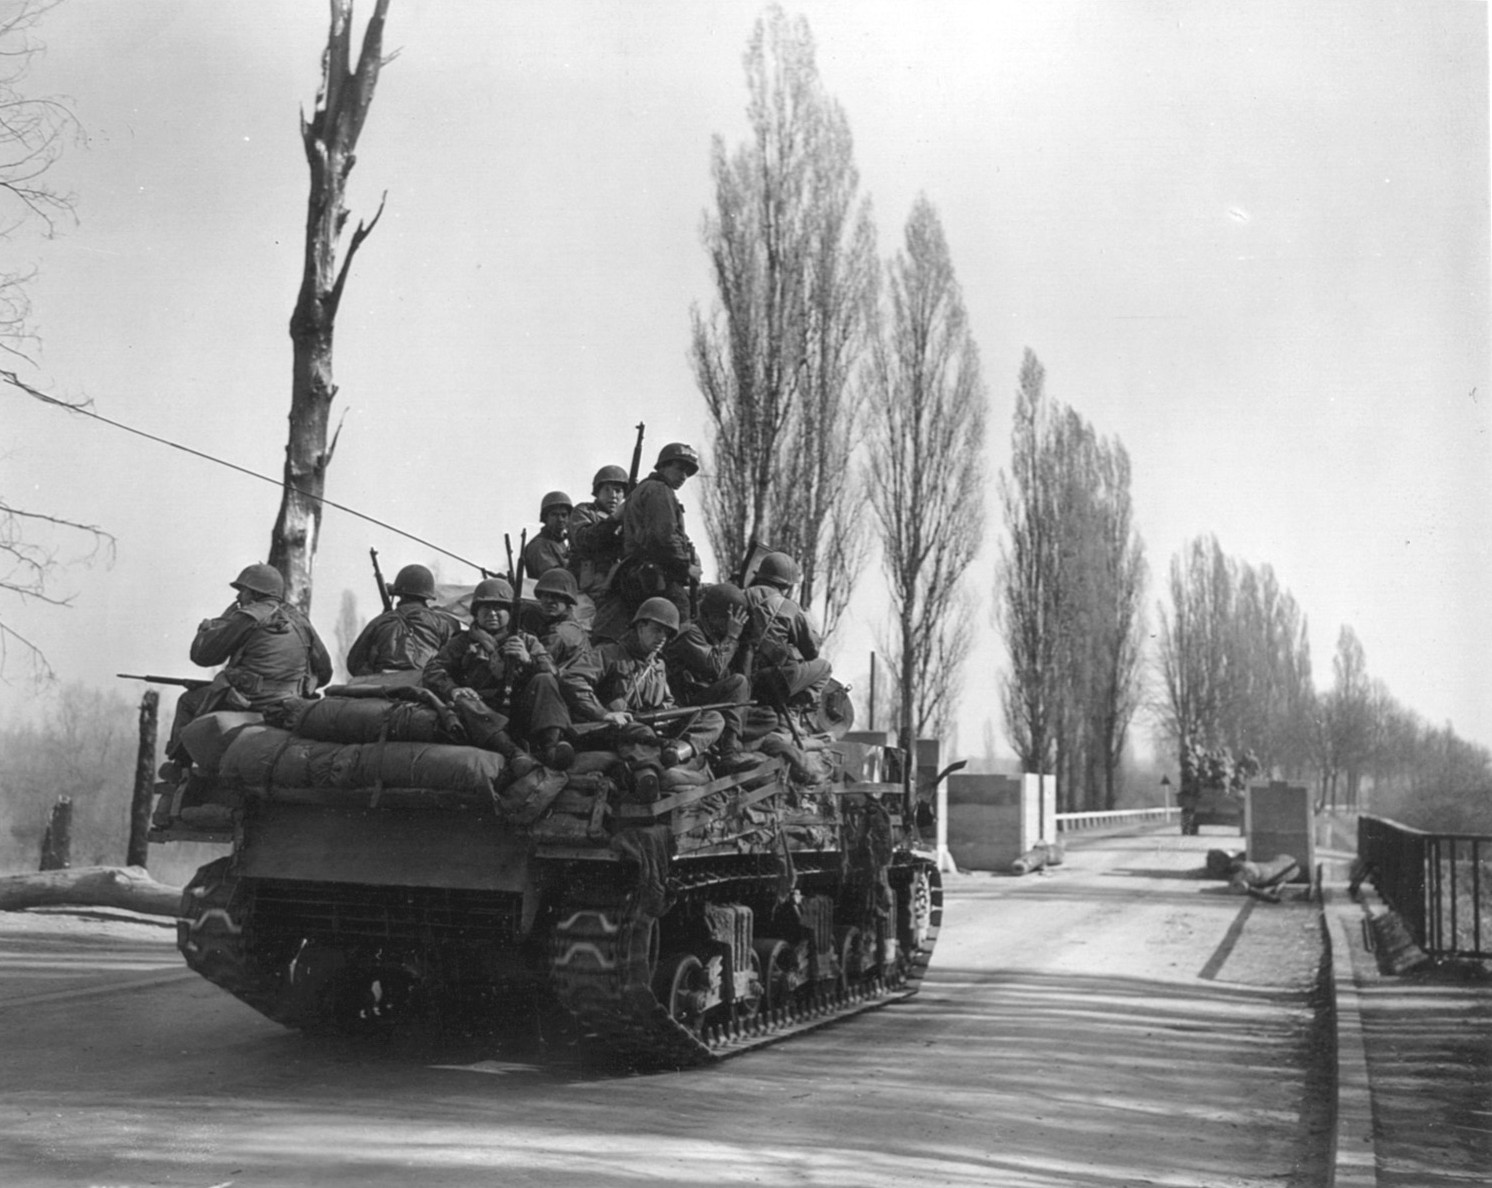 U.S. tanks loaded with infantrymen pass through a final roadblock before crossing the Rhine River.